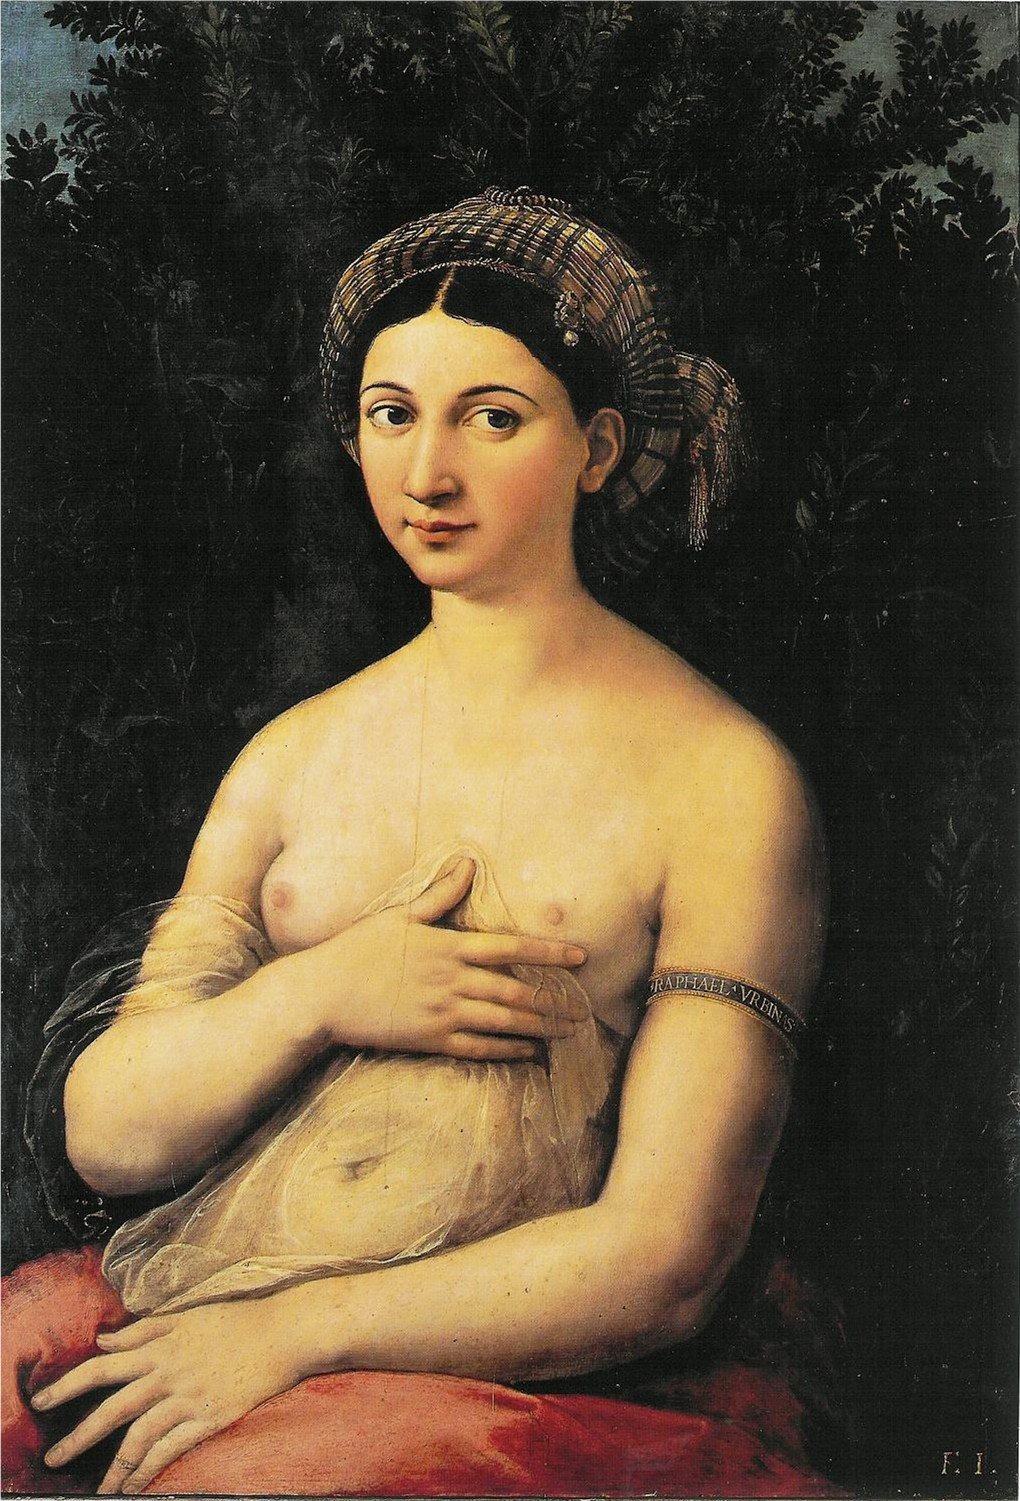 Naked School Tits - The 10 Best Artworks by Raphael, Seraphic Genius of the Renaissanceâ€”Ranked